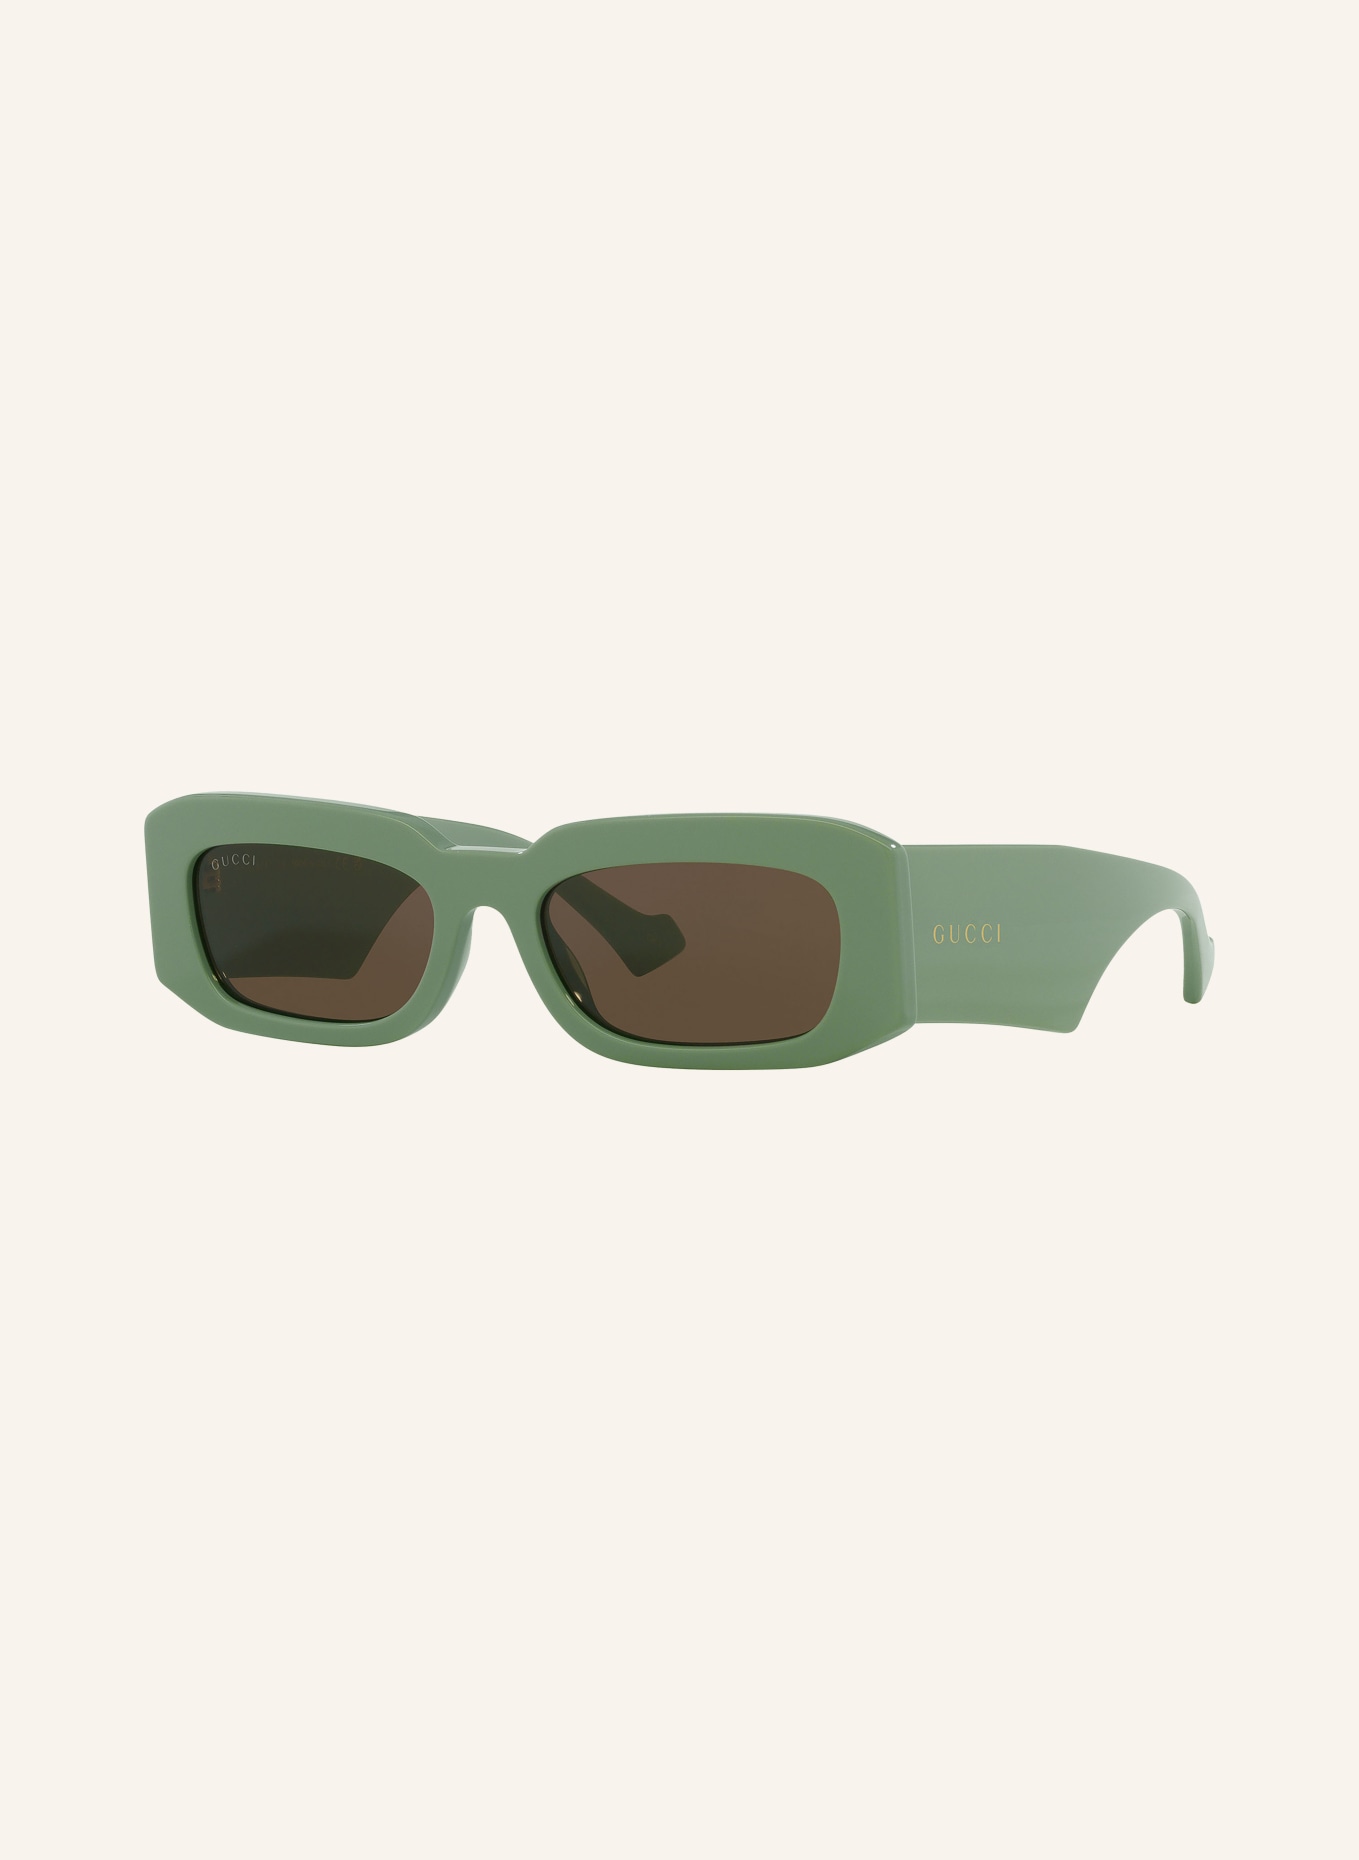 GUCCI Sunglasses GG1426S, Color: 2500D1 - LIGHT GREEN/ BROWN (Image 1)